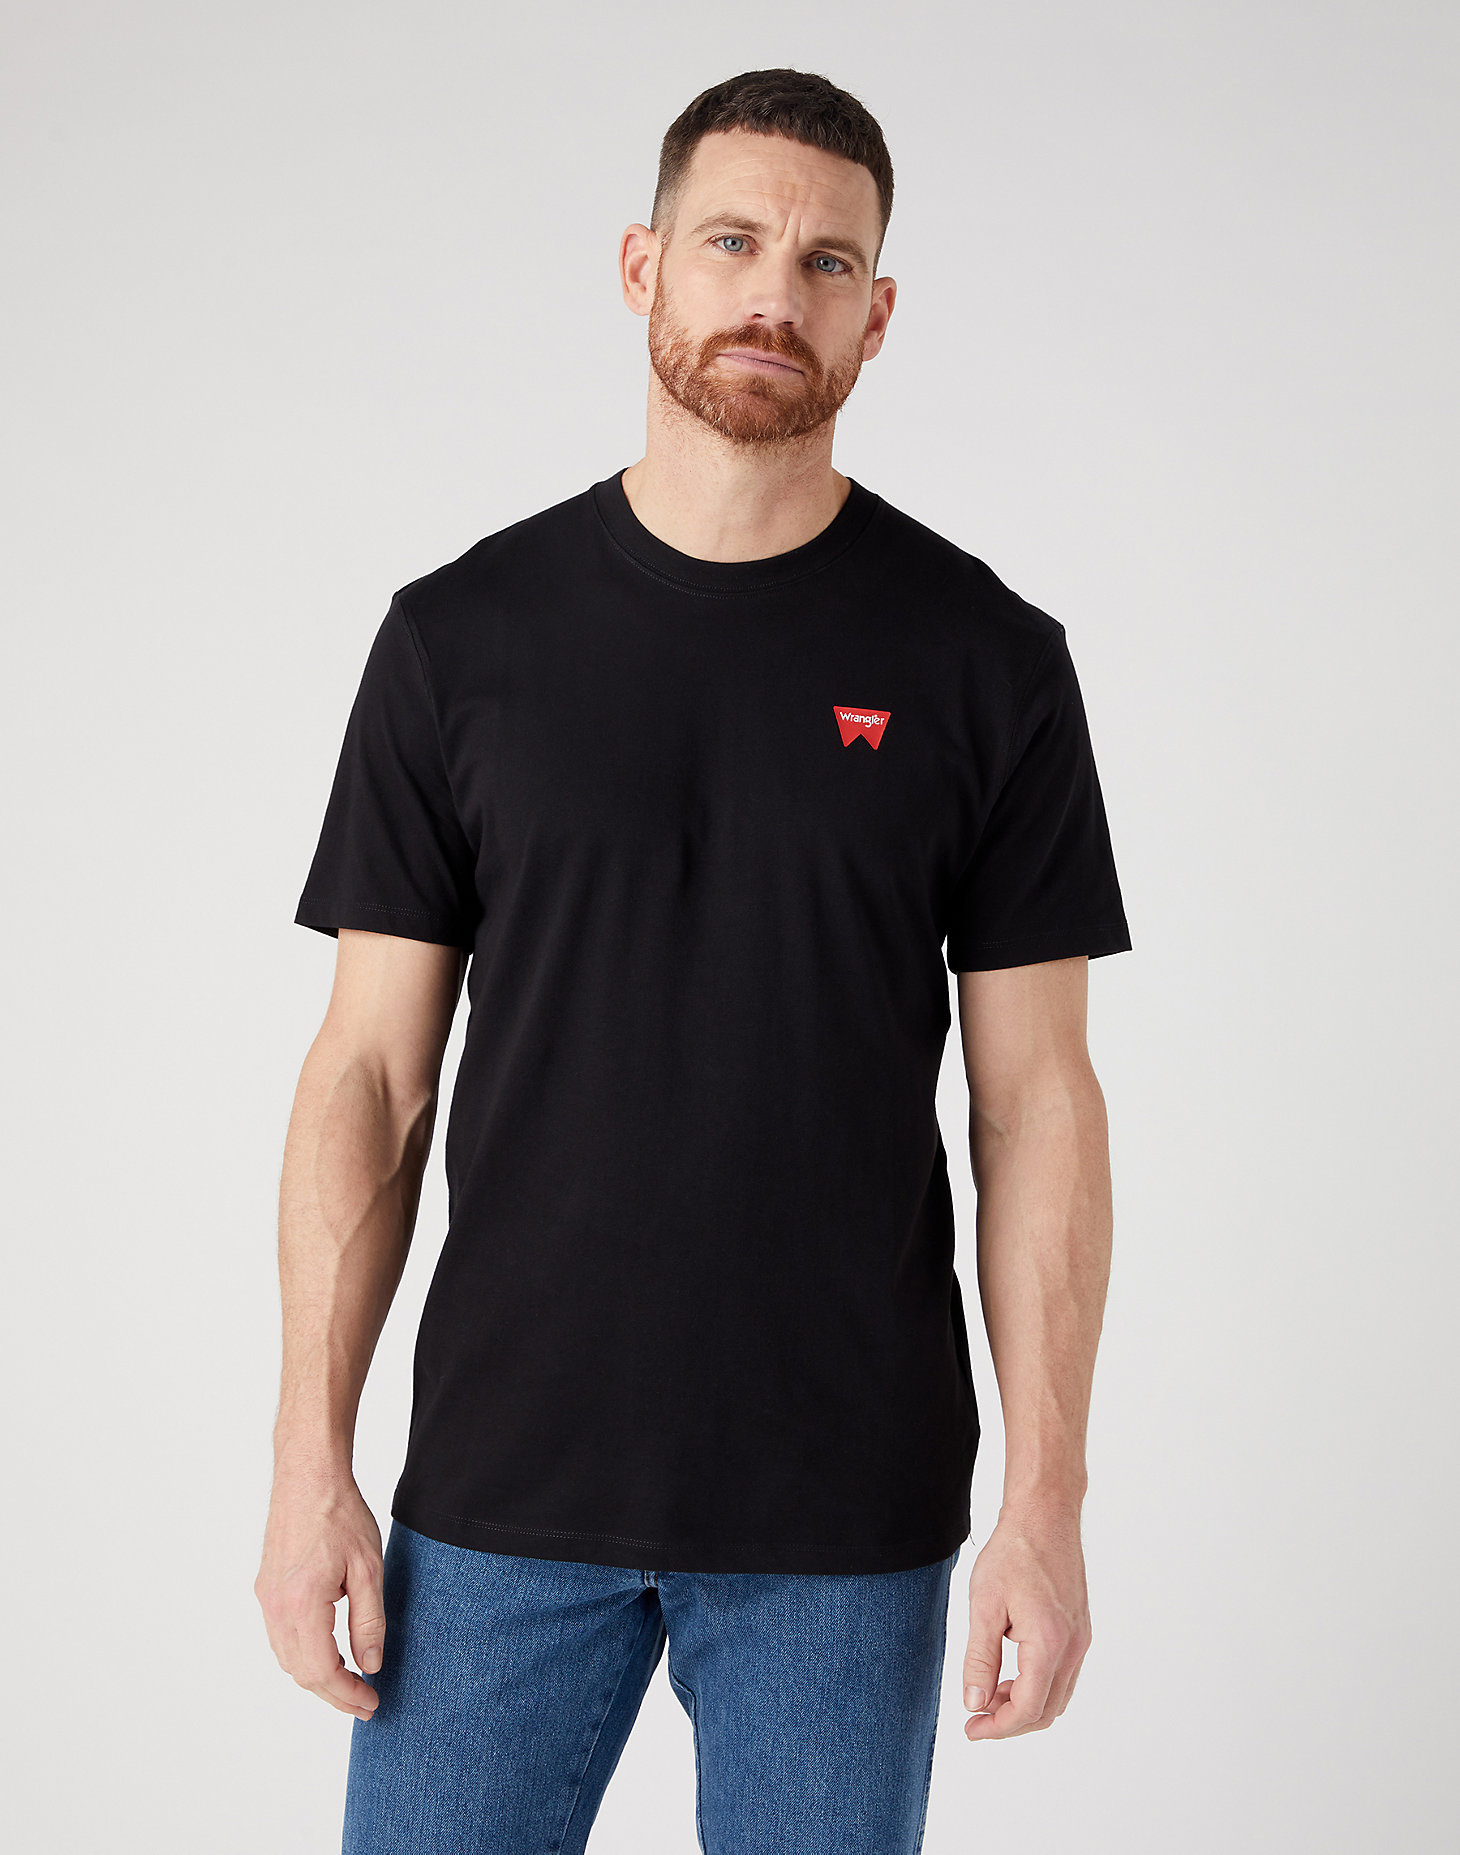 Sign Off Tee in Black main view